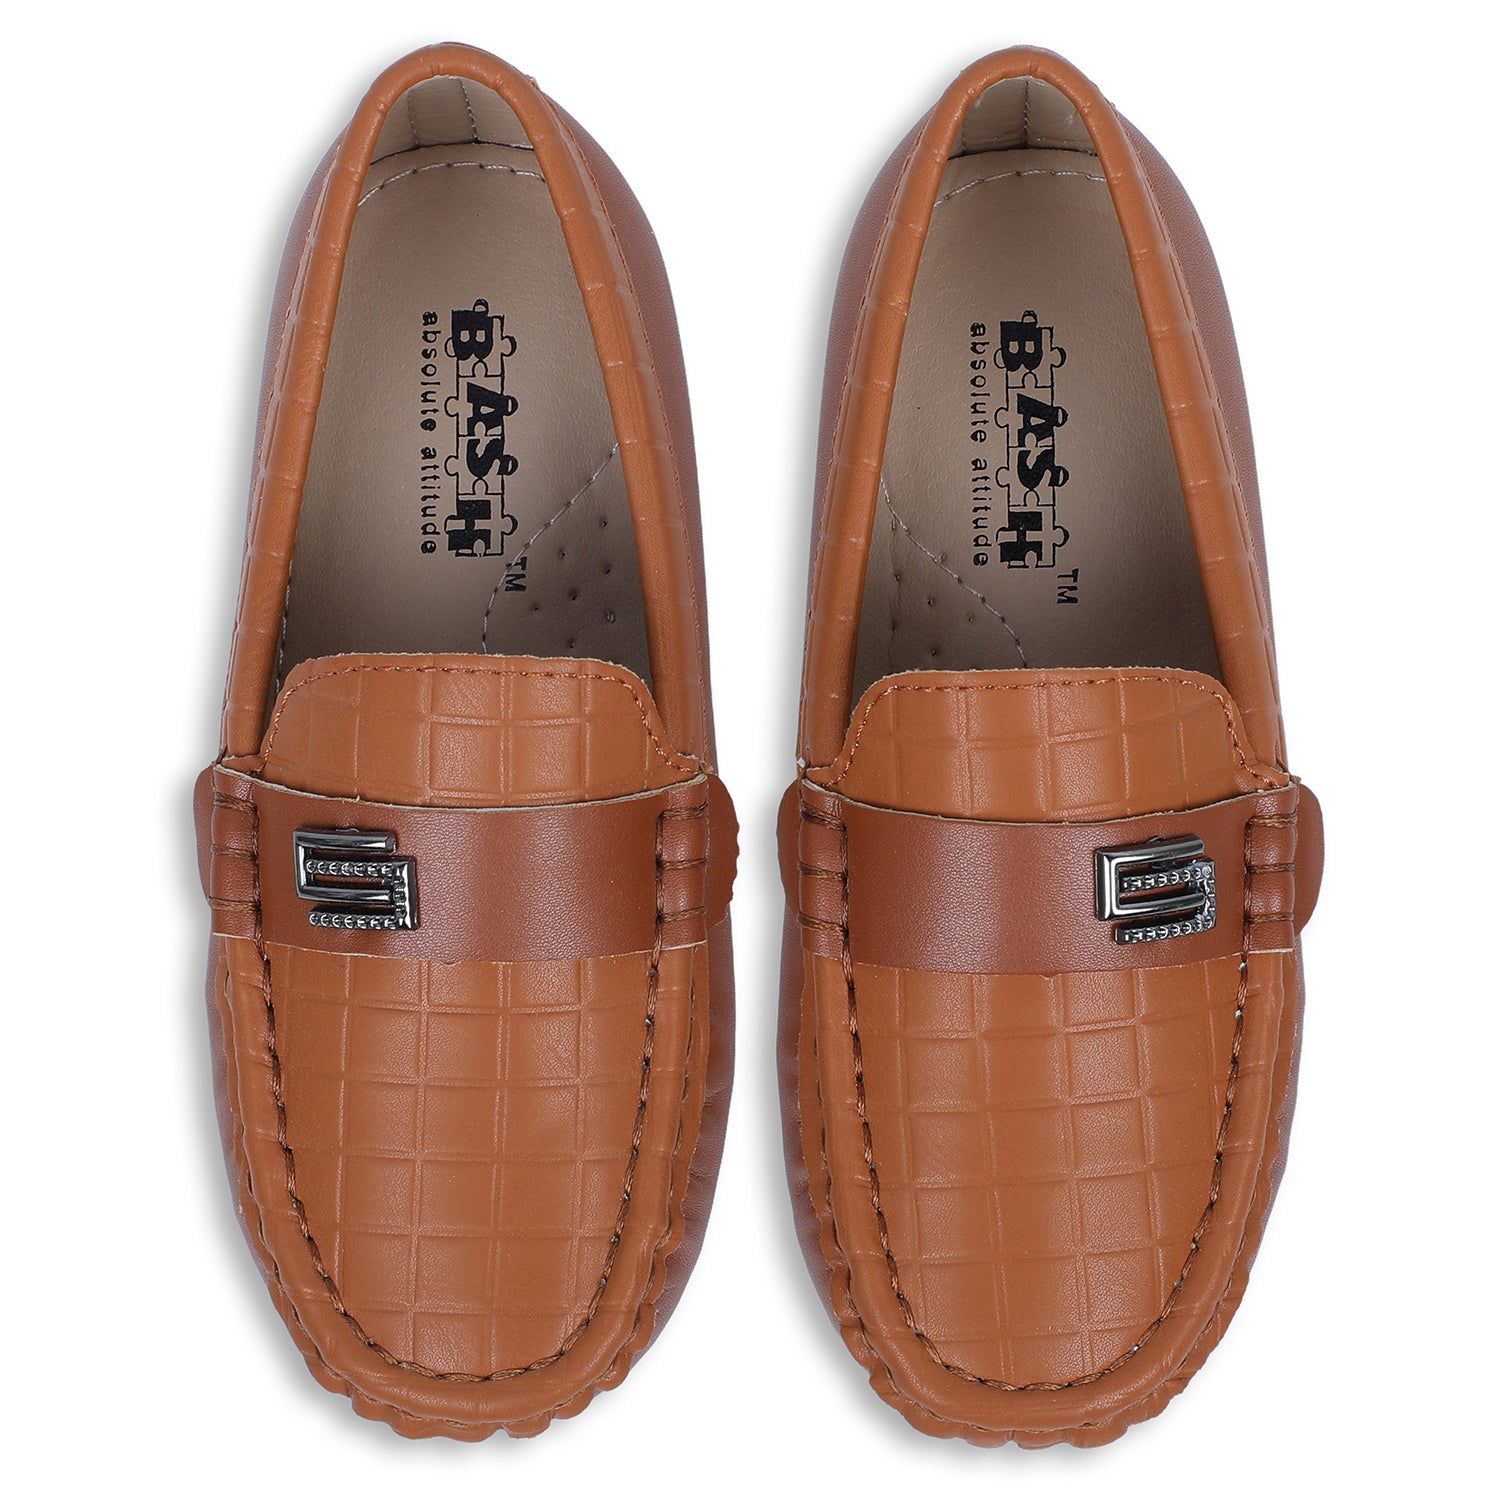 Baby Moo x Bash Kids Embossed Leatherite Loafer Shoes - Tan